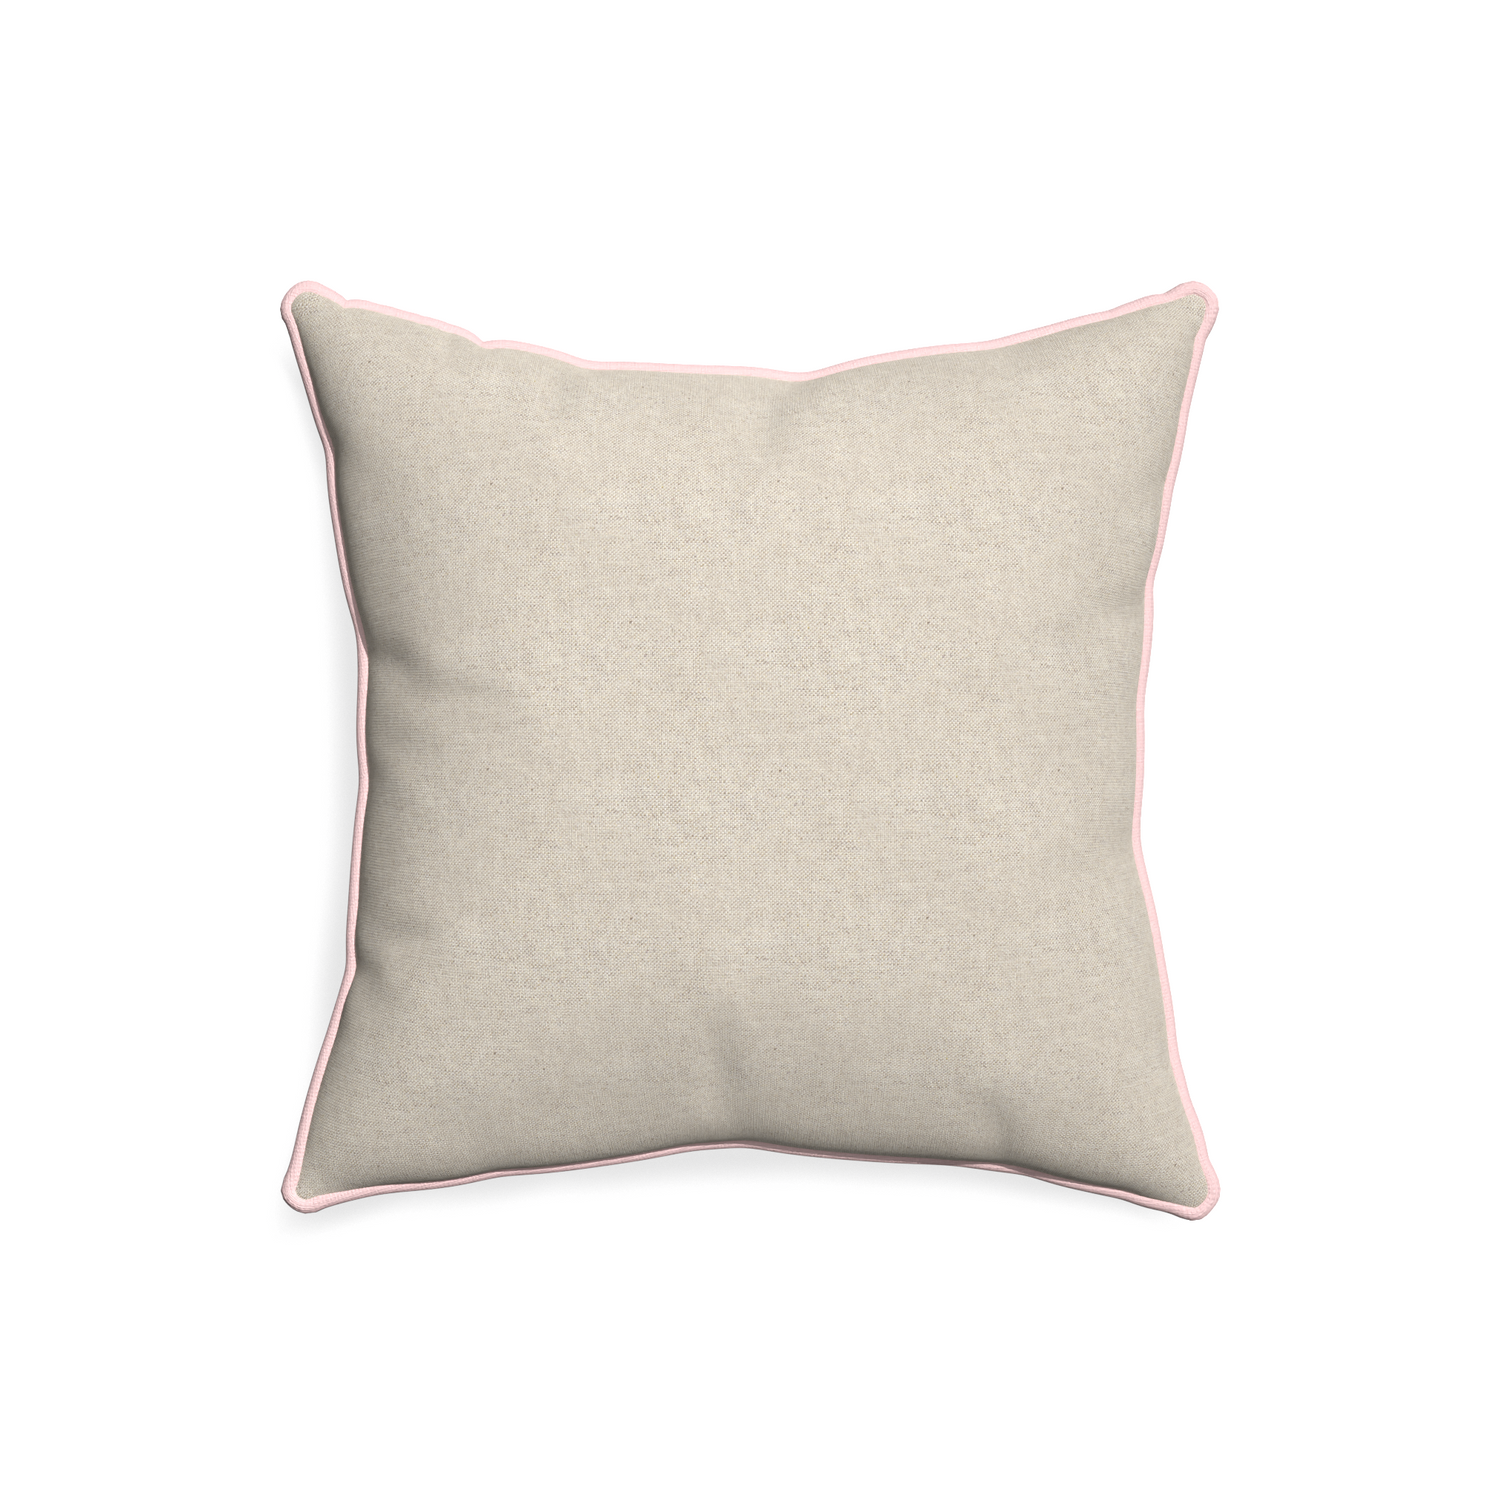 20-square oat custom light brownpillow with petal piping on white background